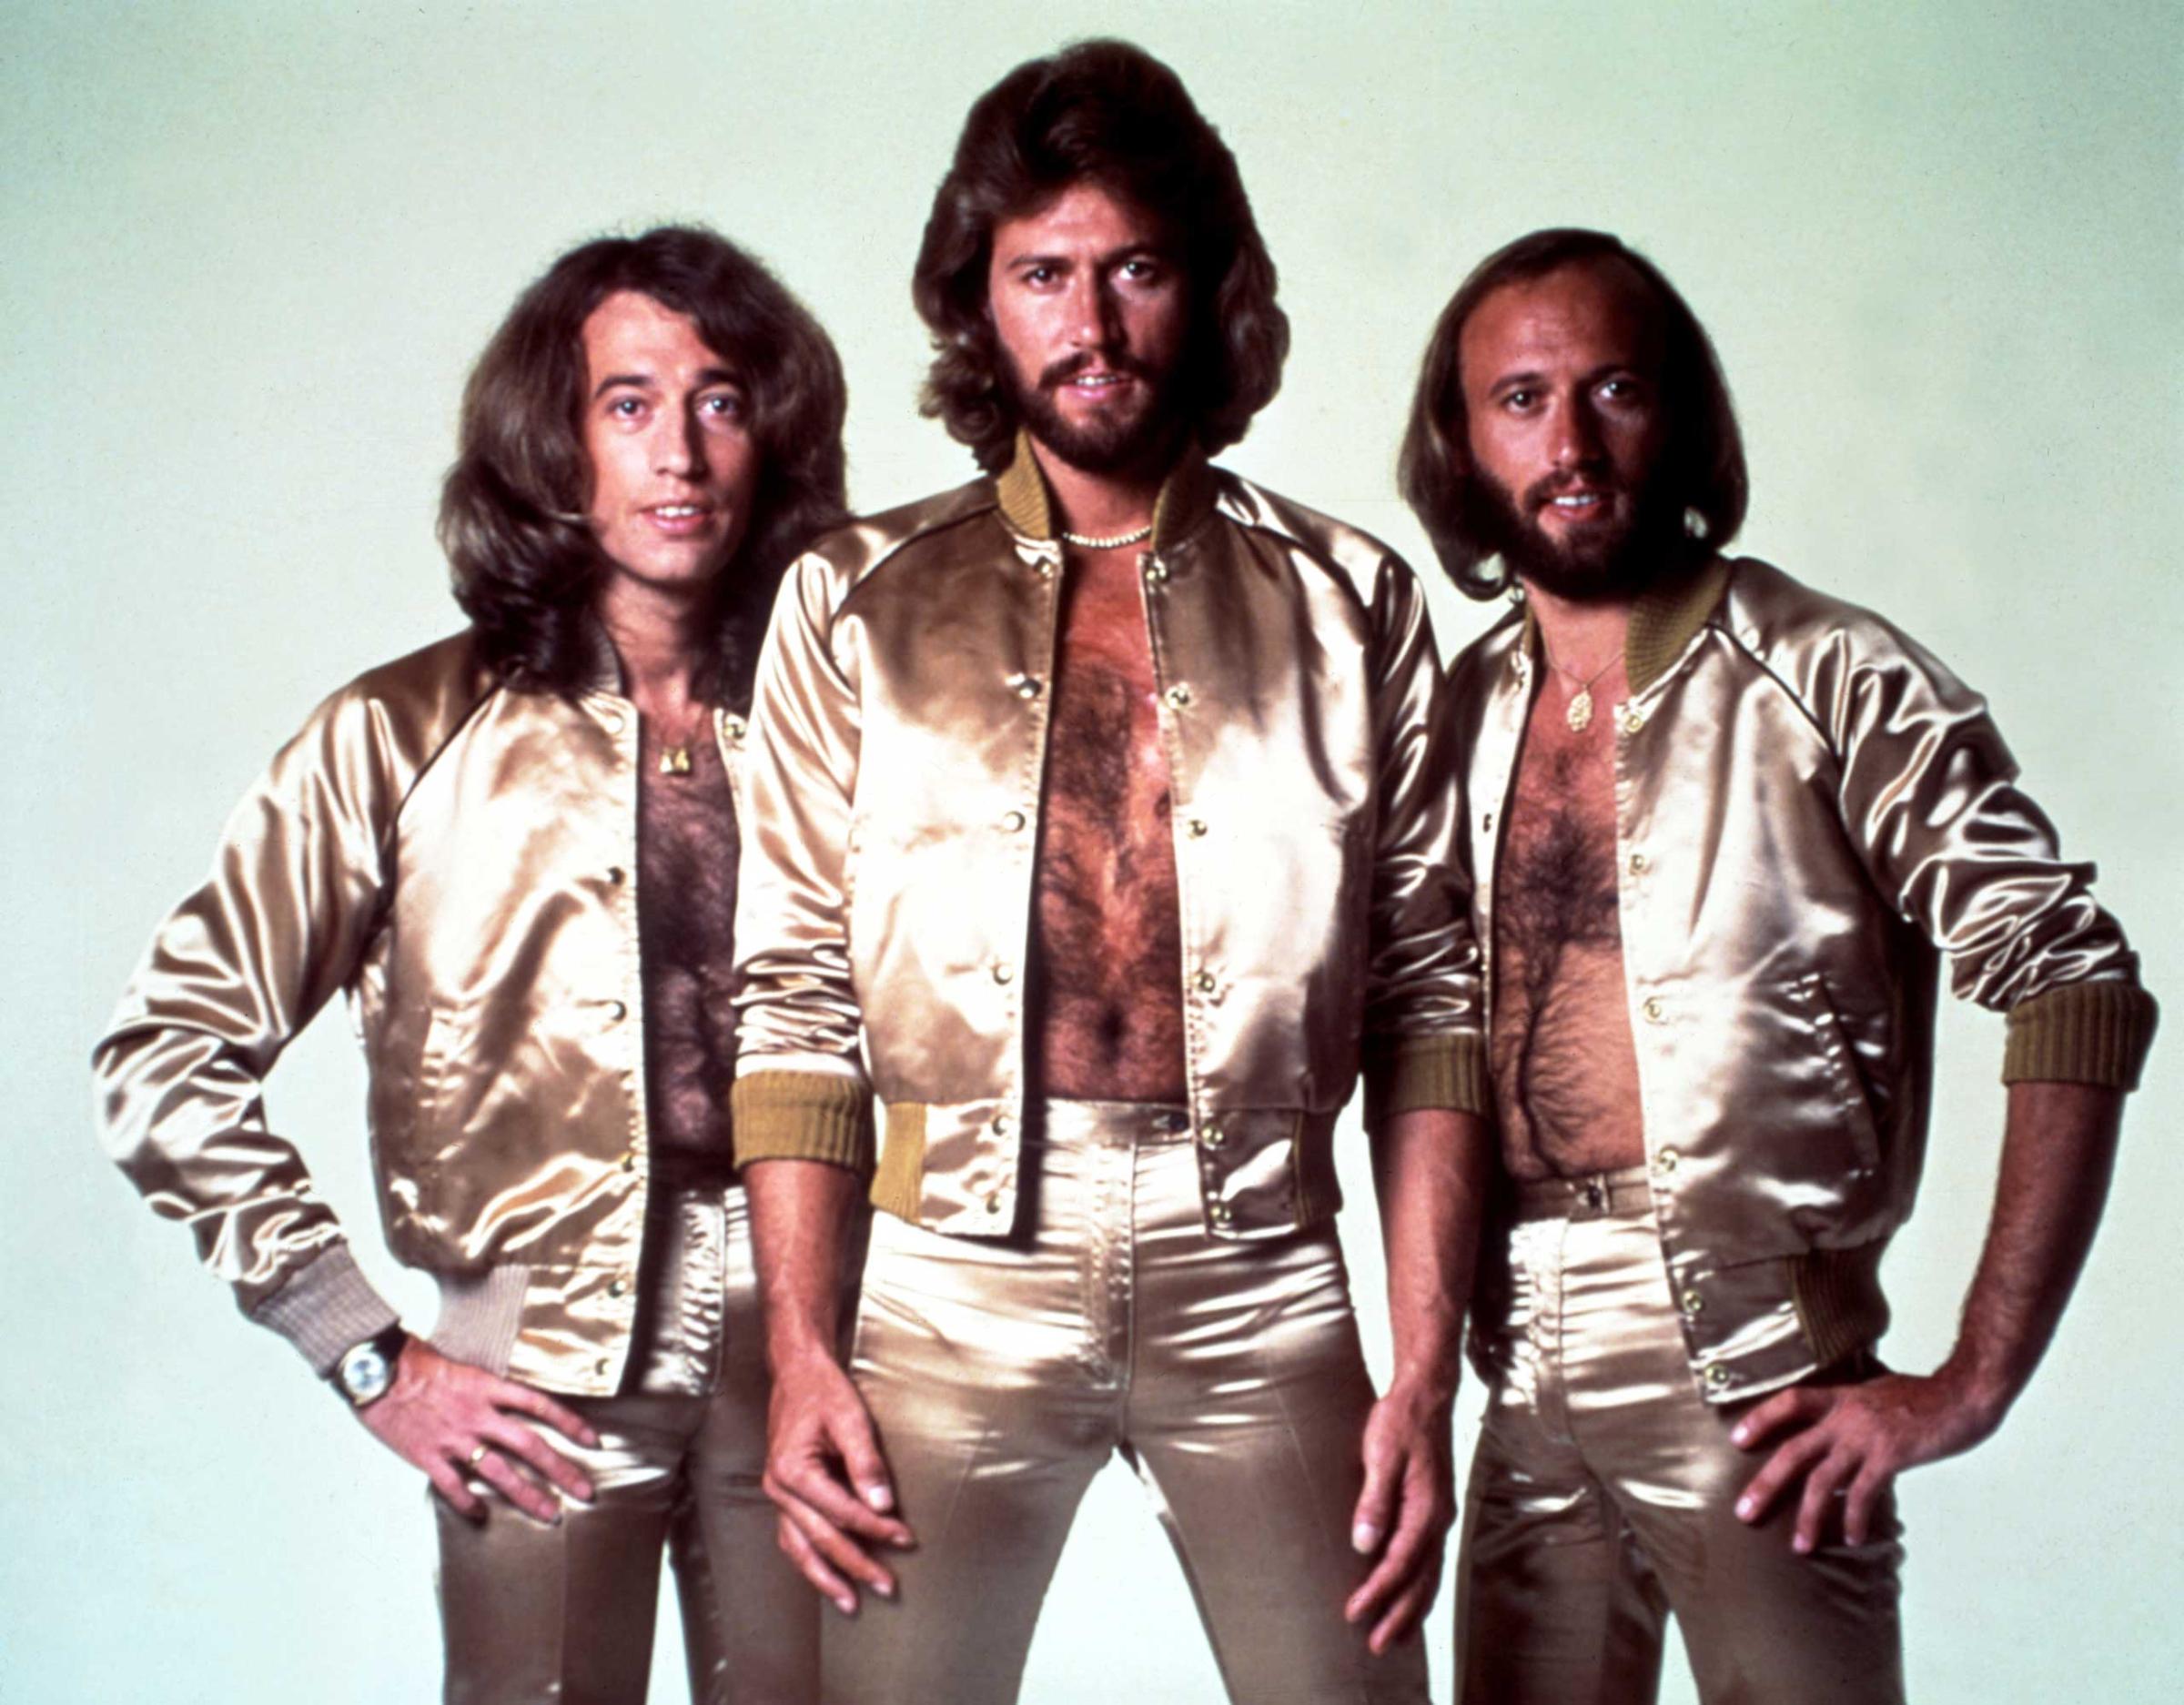 Photo of Bee Gees